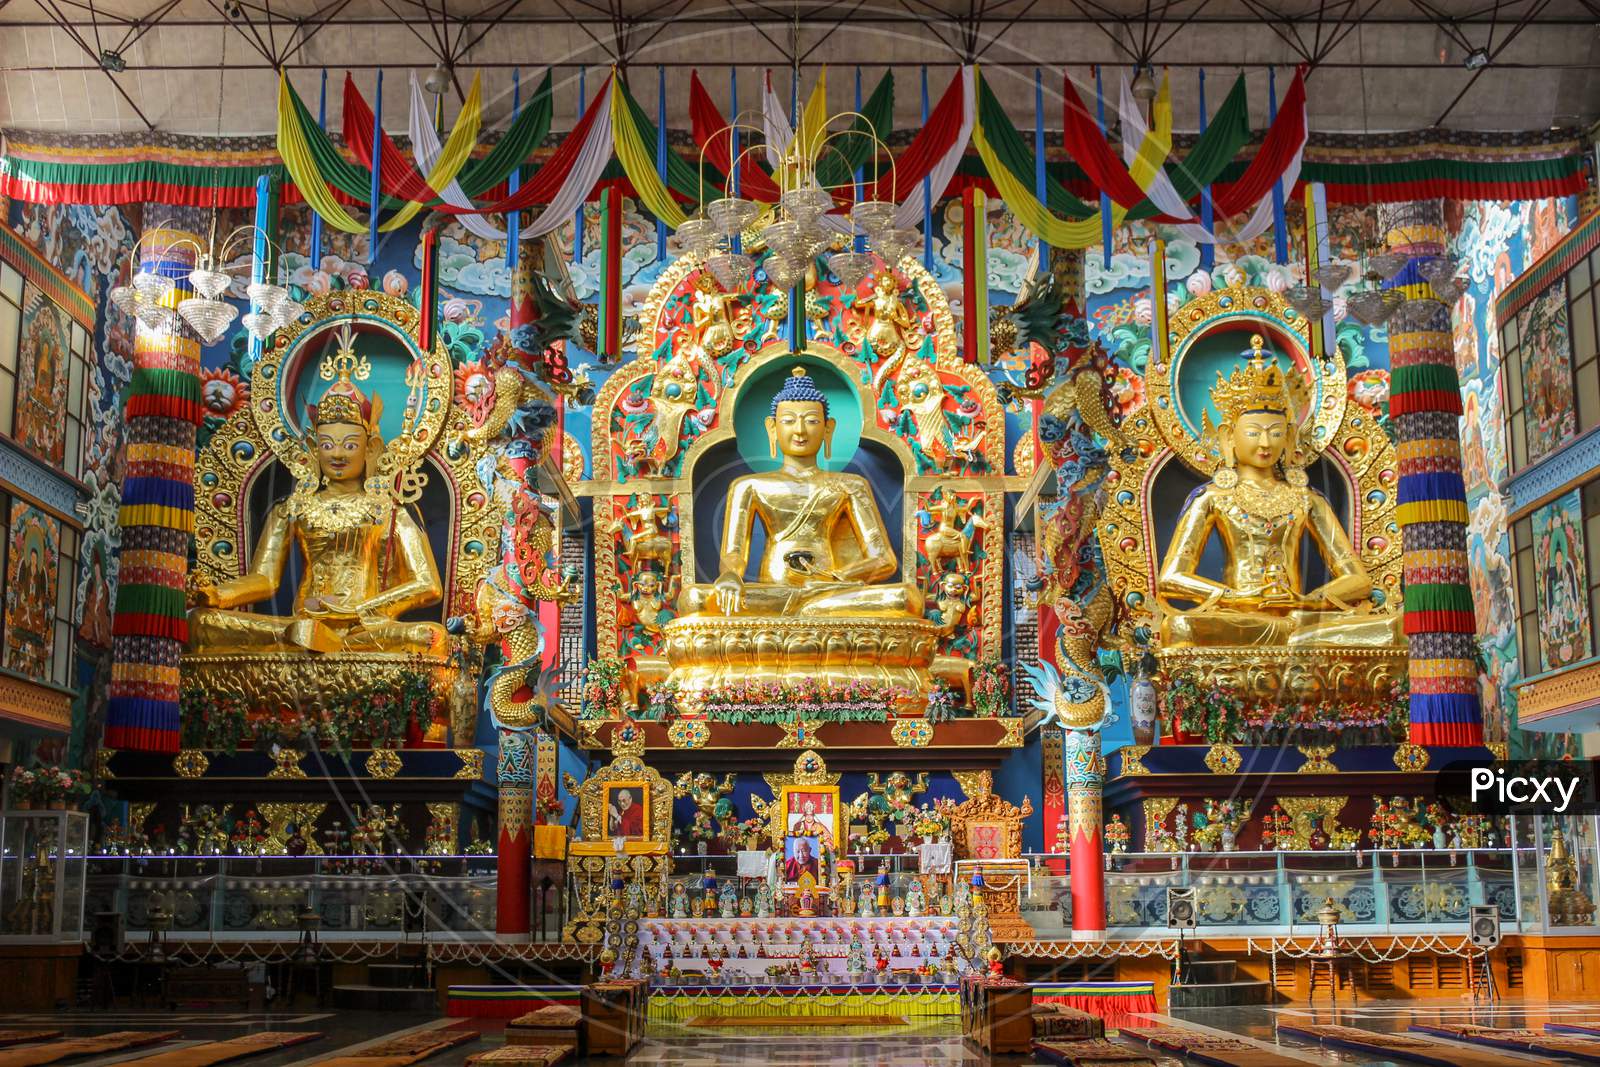 Three statues of Buddha in Golden Temple at Bylukoppe /India.